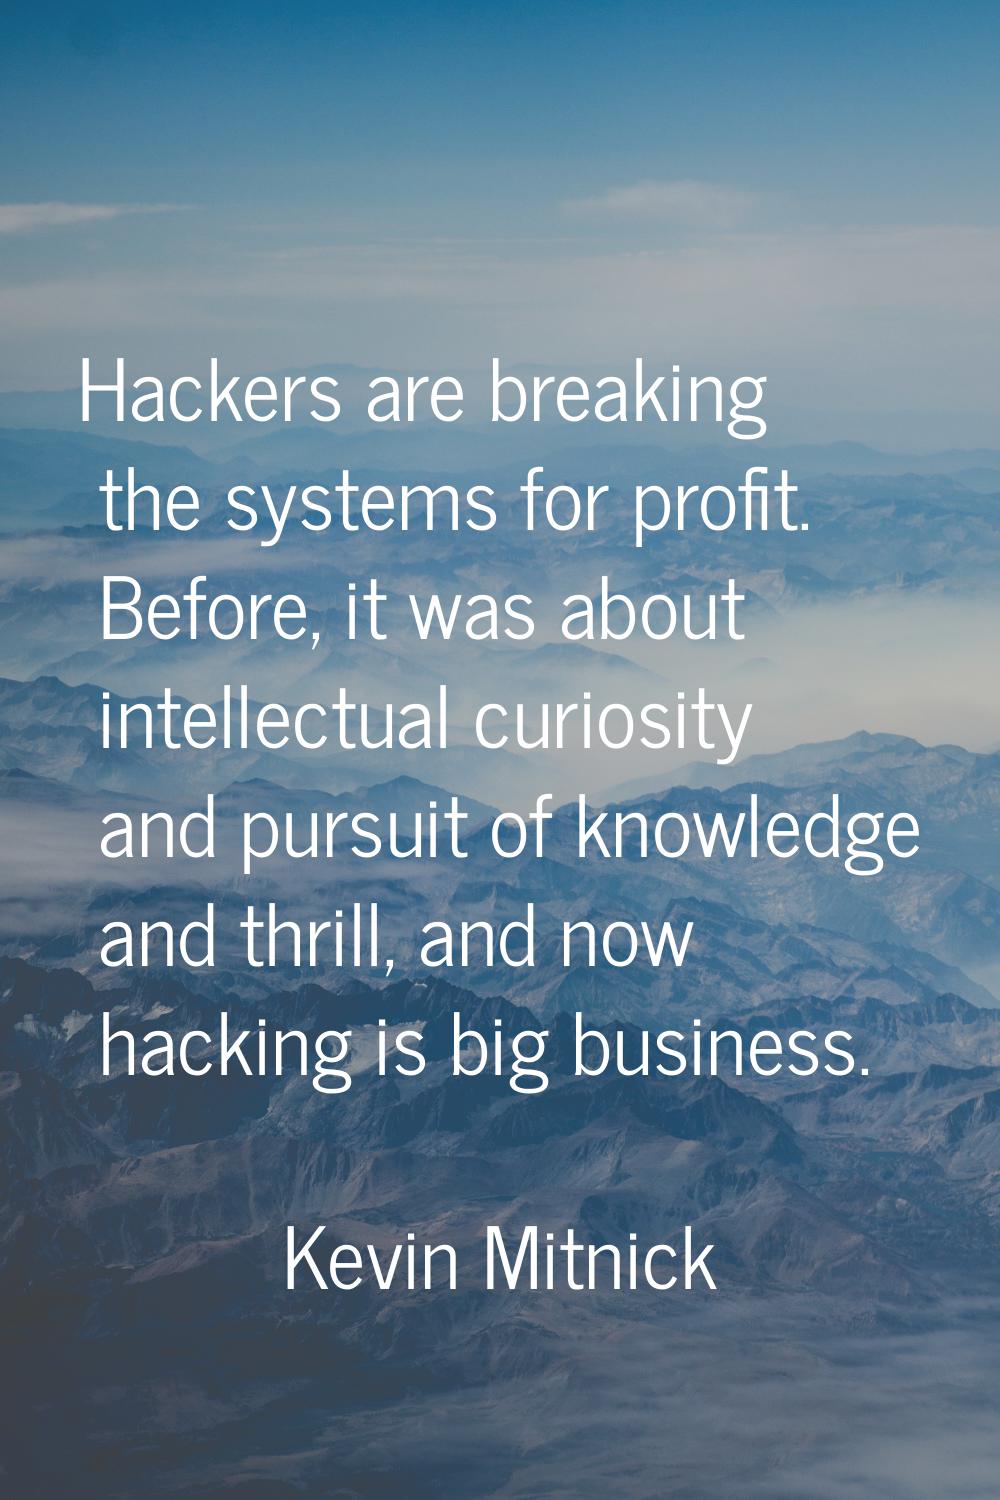 Hackers are breaking the systems for profit. Before, it was about intellectual curiosity and pursui